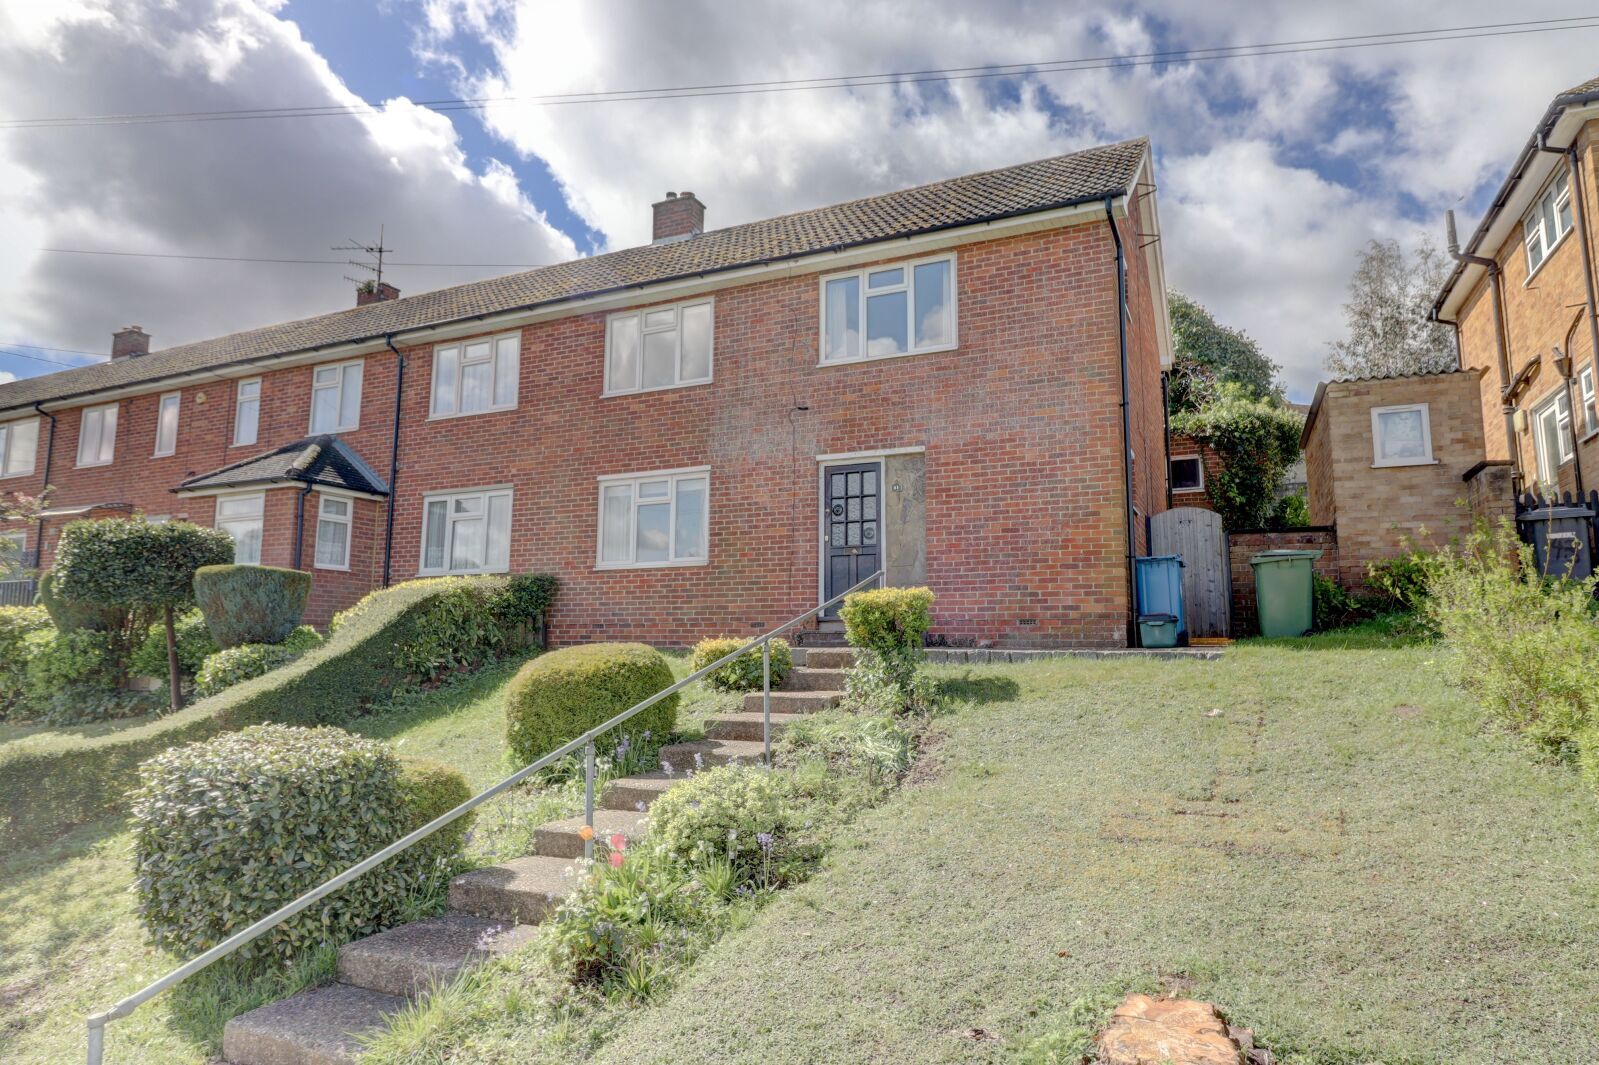 3 bedroom end terraced house for sale Hicks Farm Rise, High Wycombe, HP13, main image